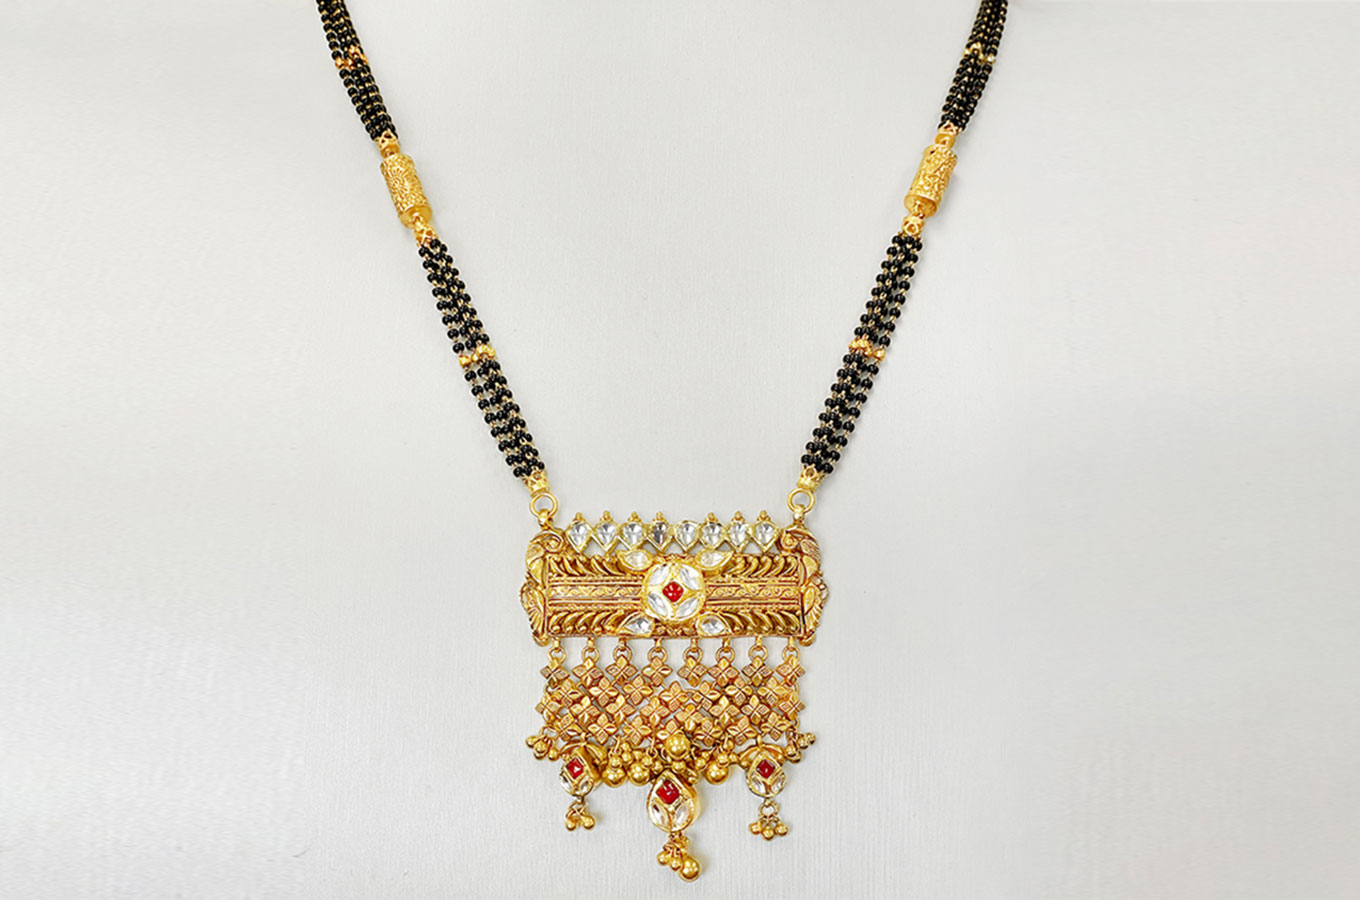 When Purchasing a Mangalsutra There are Five Mistakes to Avoid?